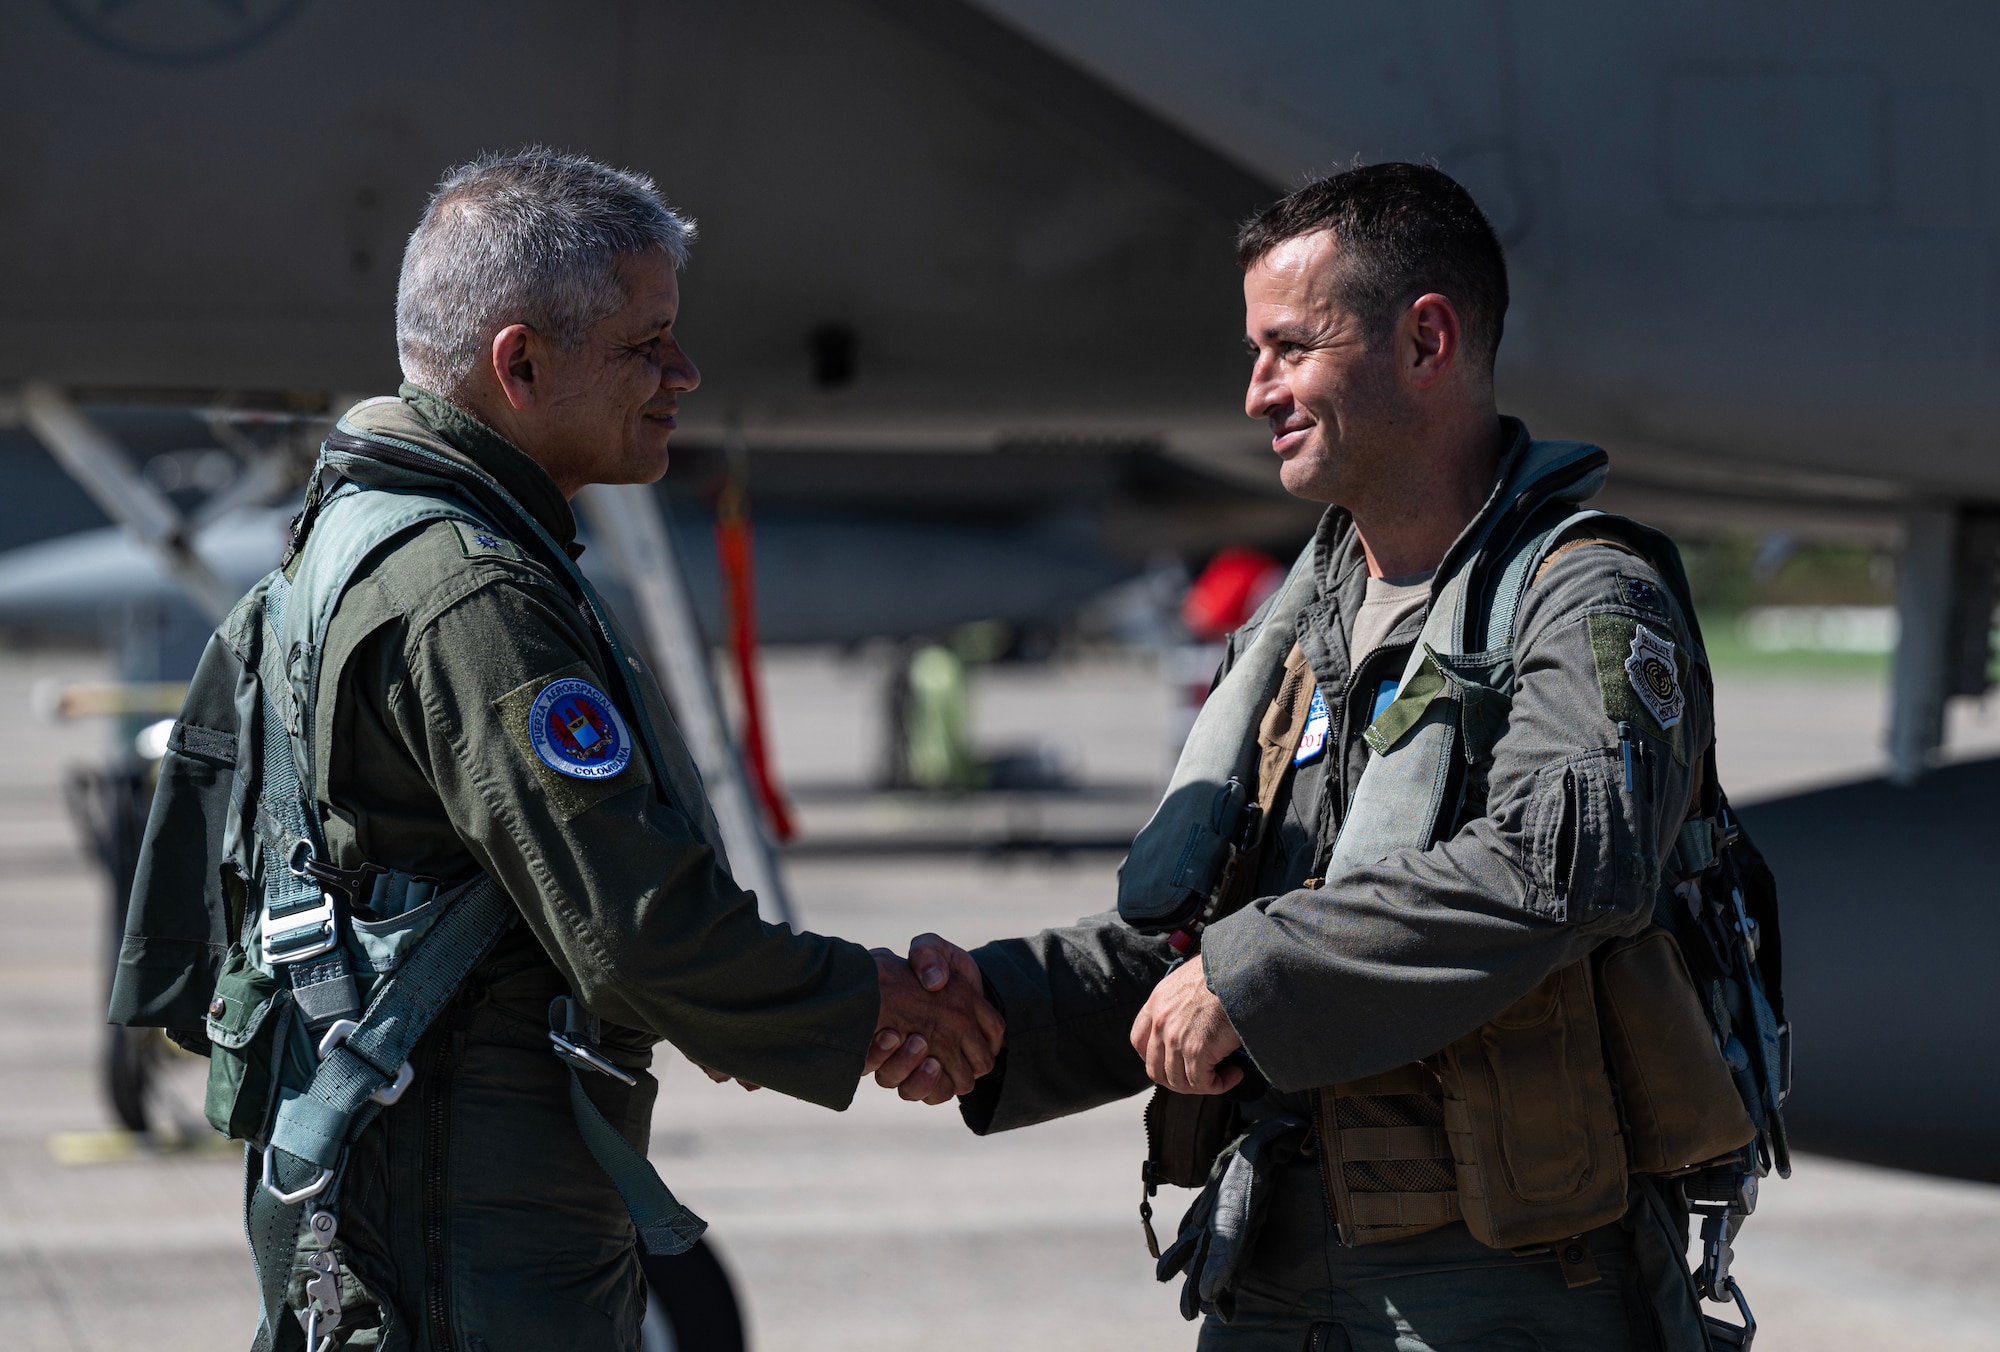 Colombia Aerospace Force (COLAF) Maj. Gen. Carlos Fernando Silva Rueda (left), Second Commander and Chief of Staff of the COLAF, shakes hands with U.S. Air Force Lt. Col. Daniel Schiller (right), 125th Fighter Wing chief of safety, Florida Air National Guard, after a training sortie during exercise Rel‡mpago VIII in Palanquero, Colombia, Aug. 30, 2023. COLAF and U.S. Air Force aircraft fly together and against one another in training using NATO standards to promote seamless interoperability. (U.S. Air Force photo by Senior Airman Bryan Guthrie)